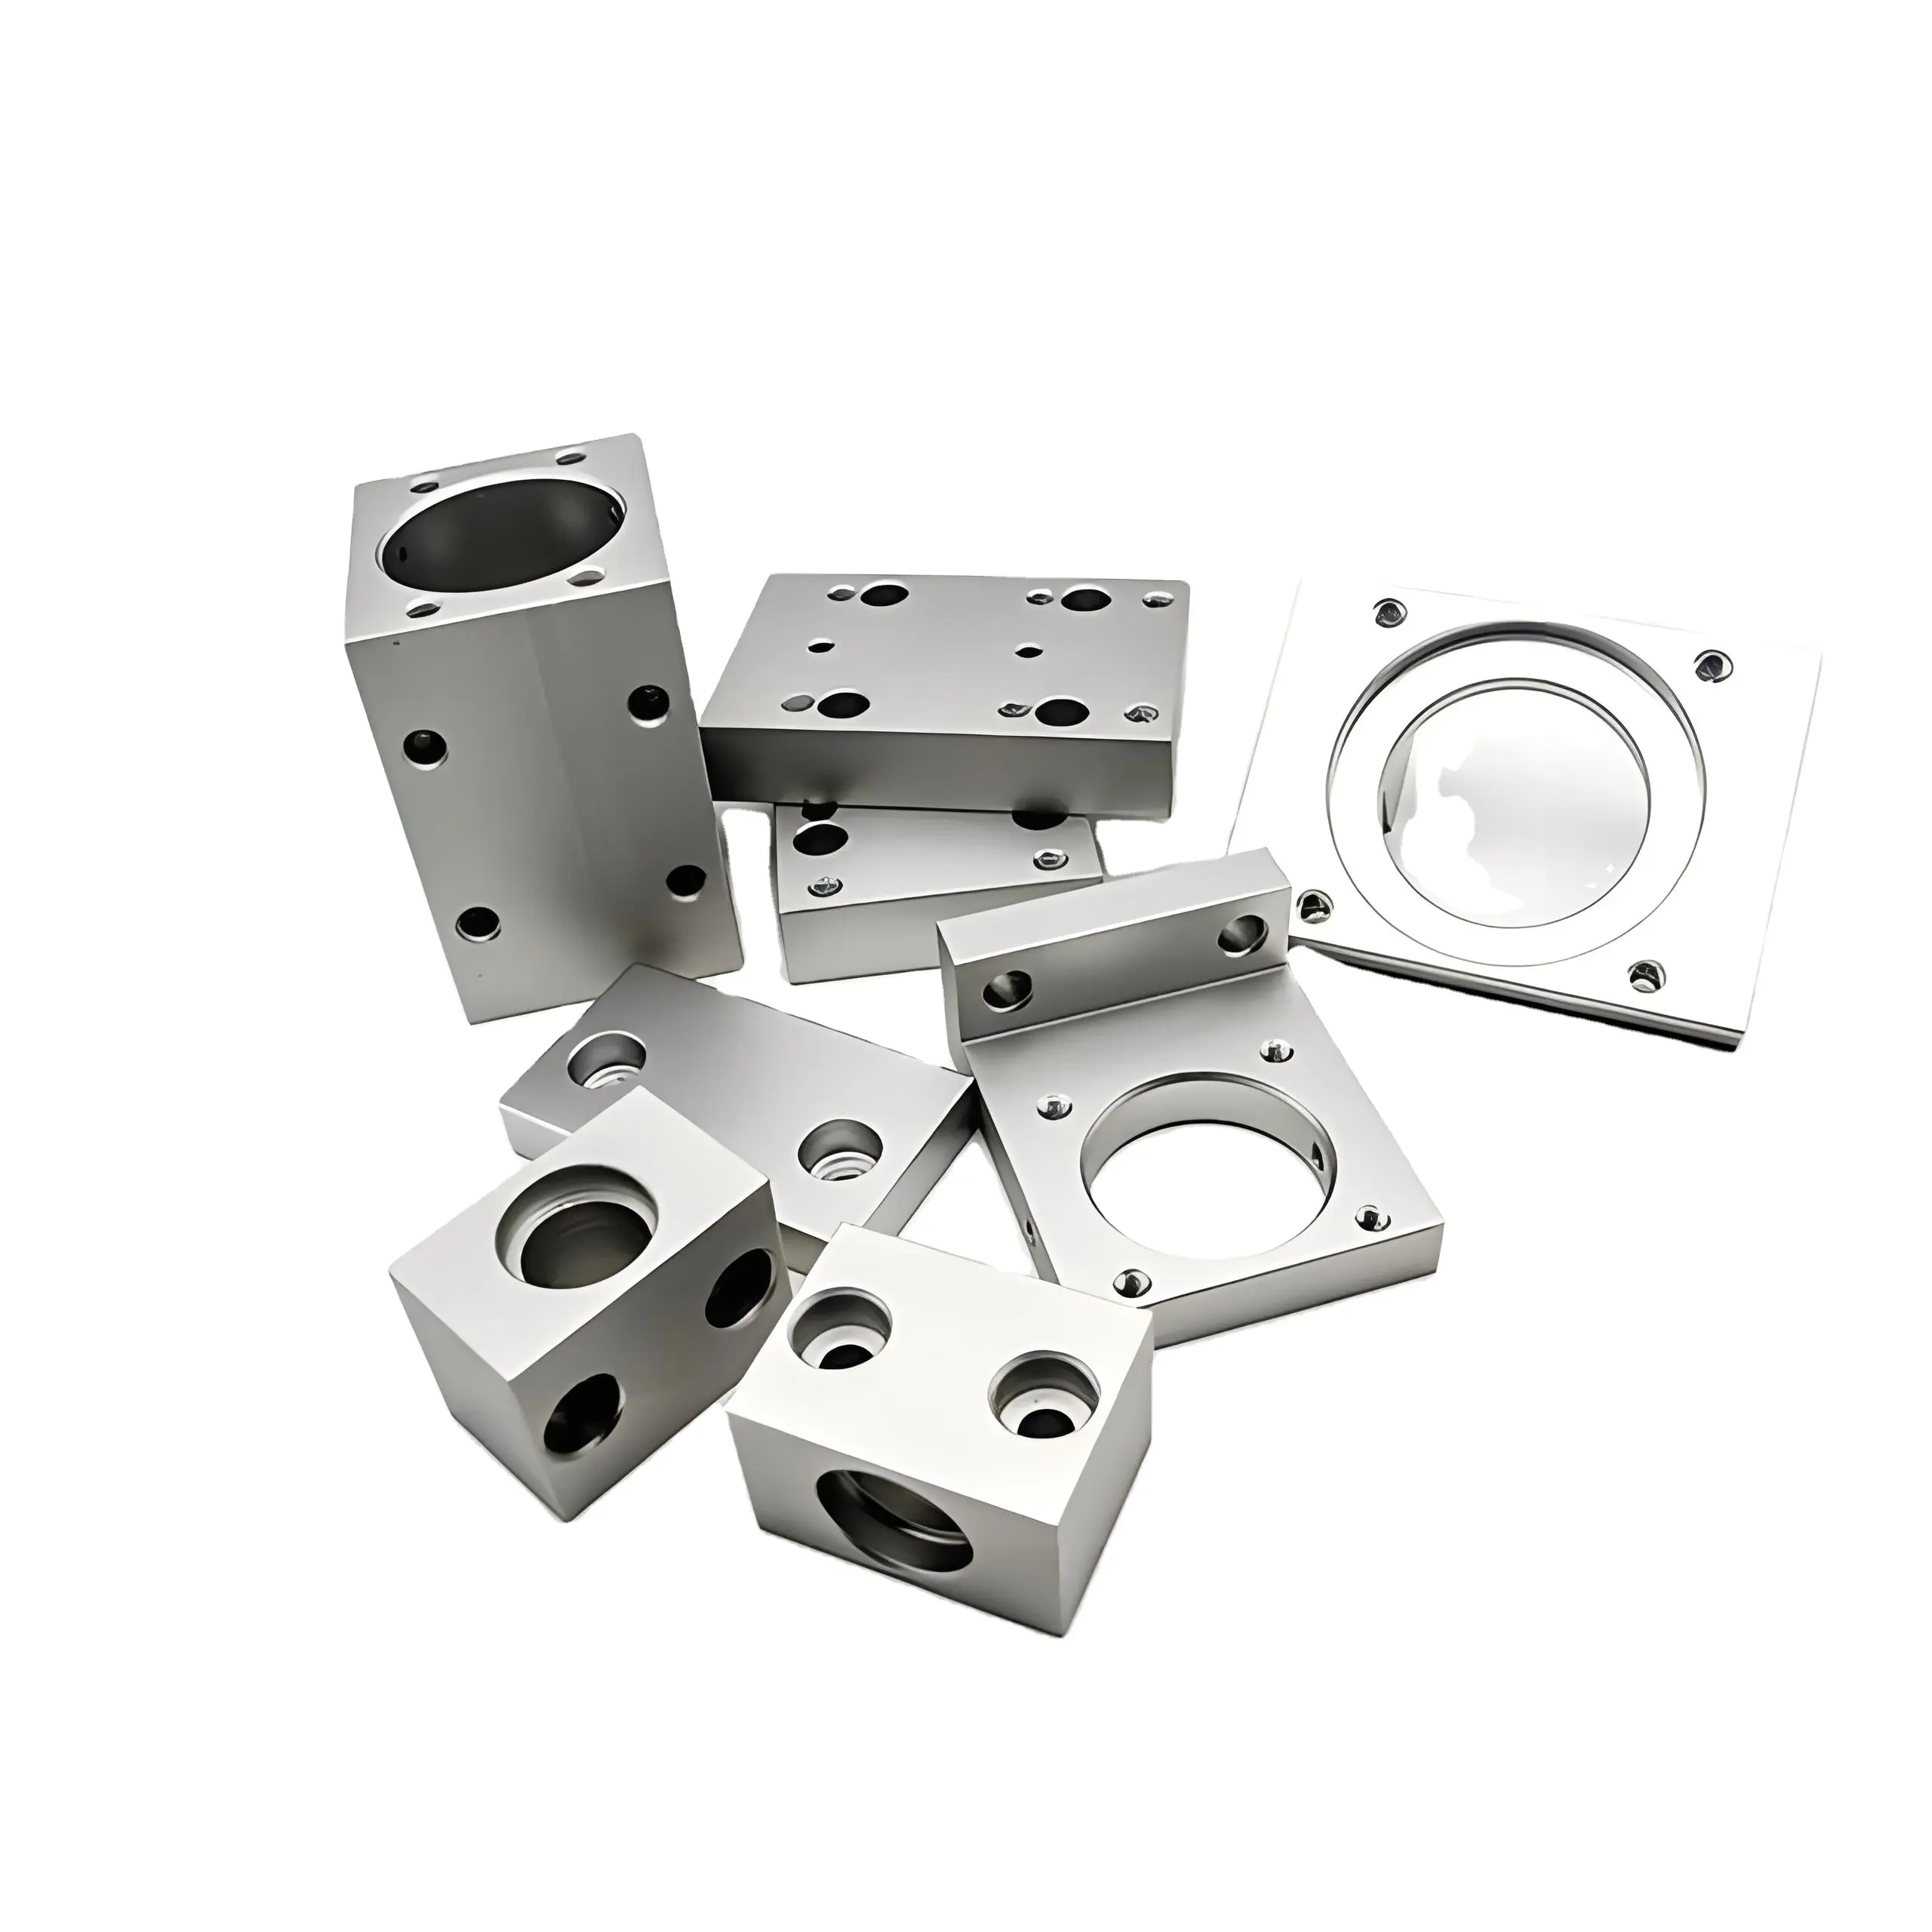 High Precision Cnc Milling Service for Industrial Medical Equipment Stainless Steel Milling Part